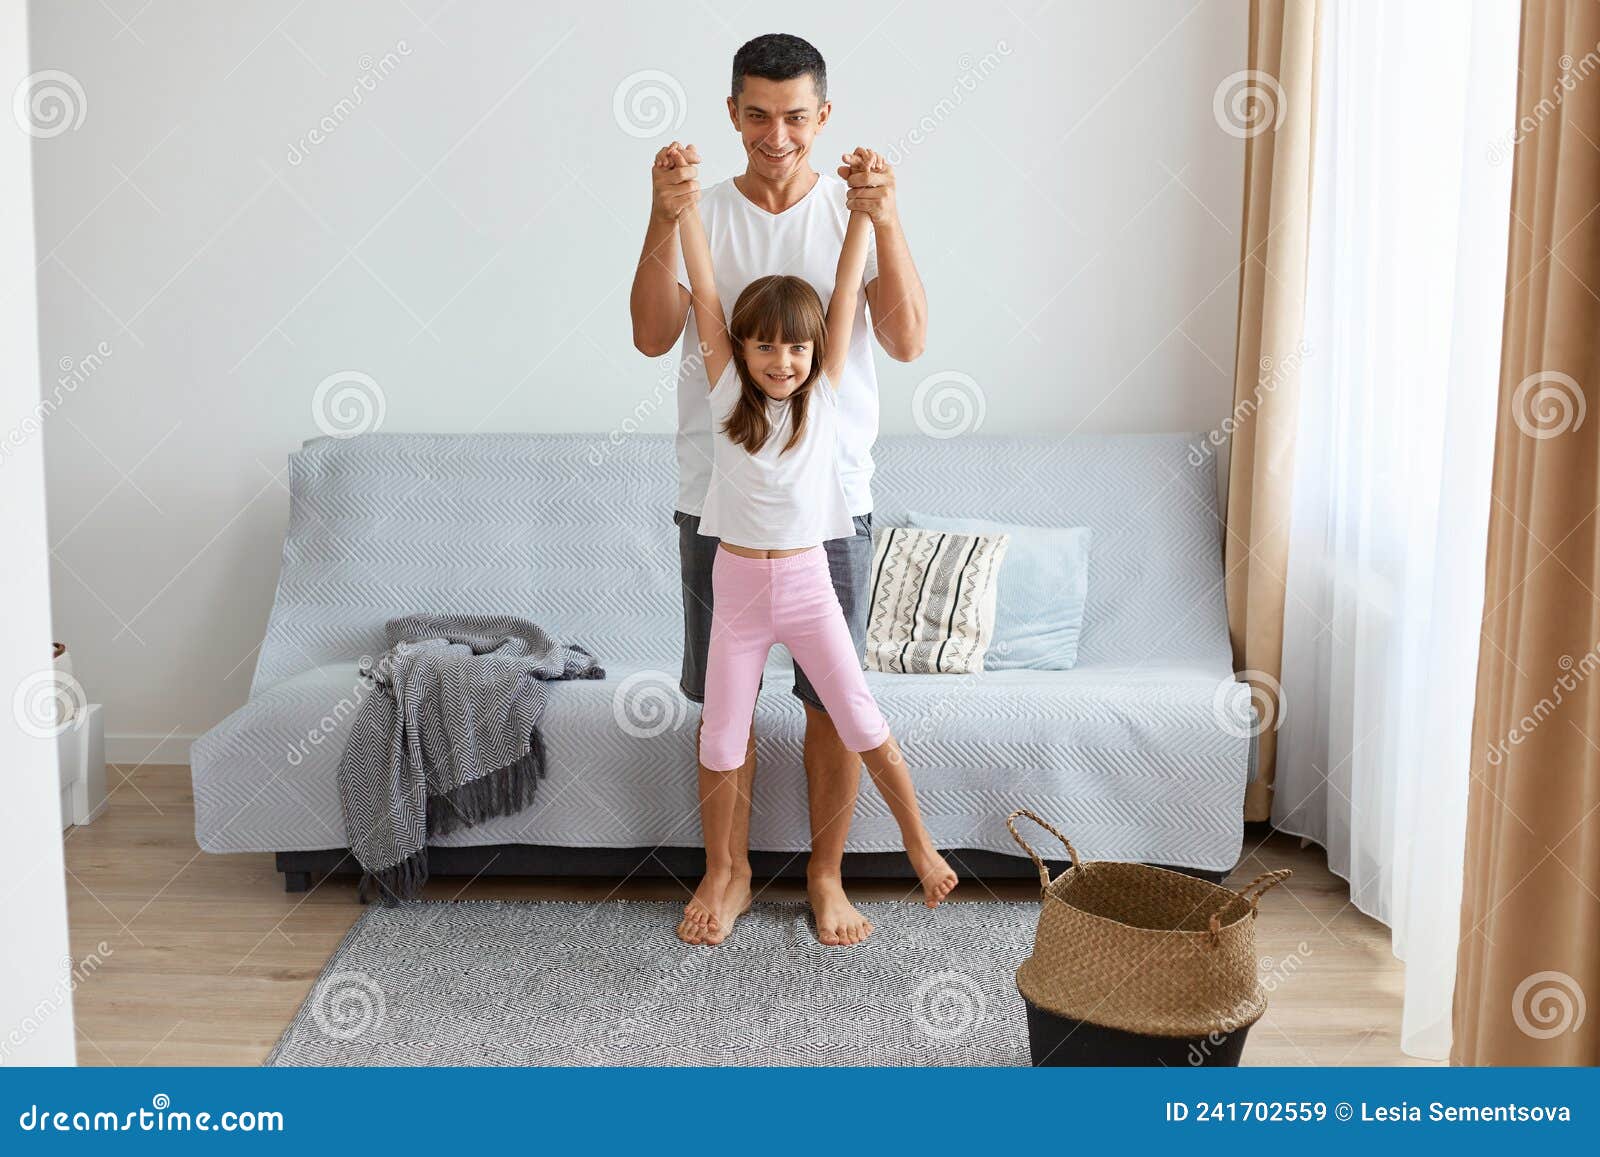 Happy Little Girl Playing with Her Father Together in the Living Room ...